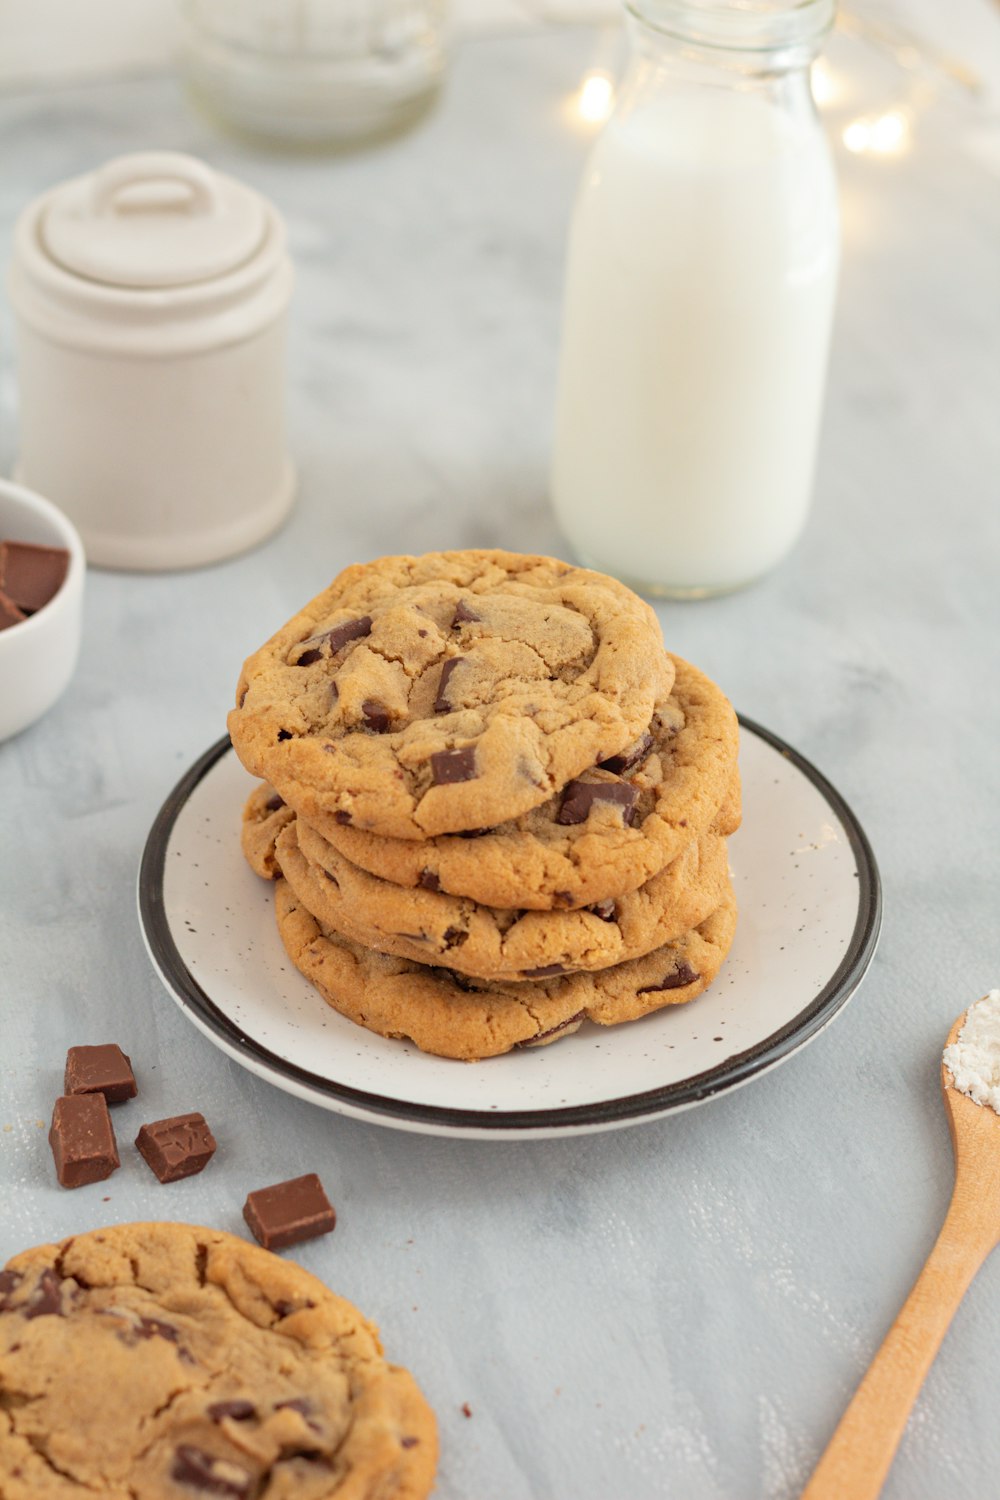 a stack of chocolate chip cookies on a plate next to a glass of milk